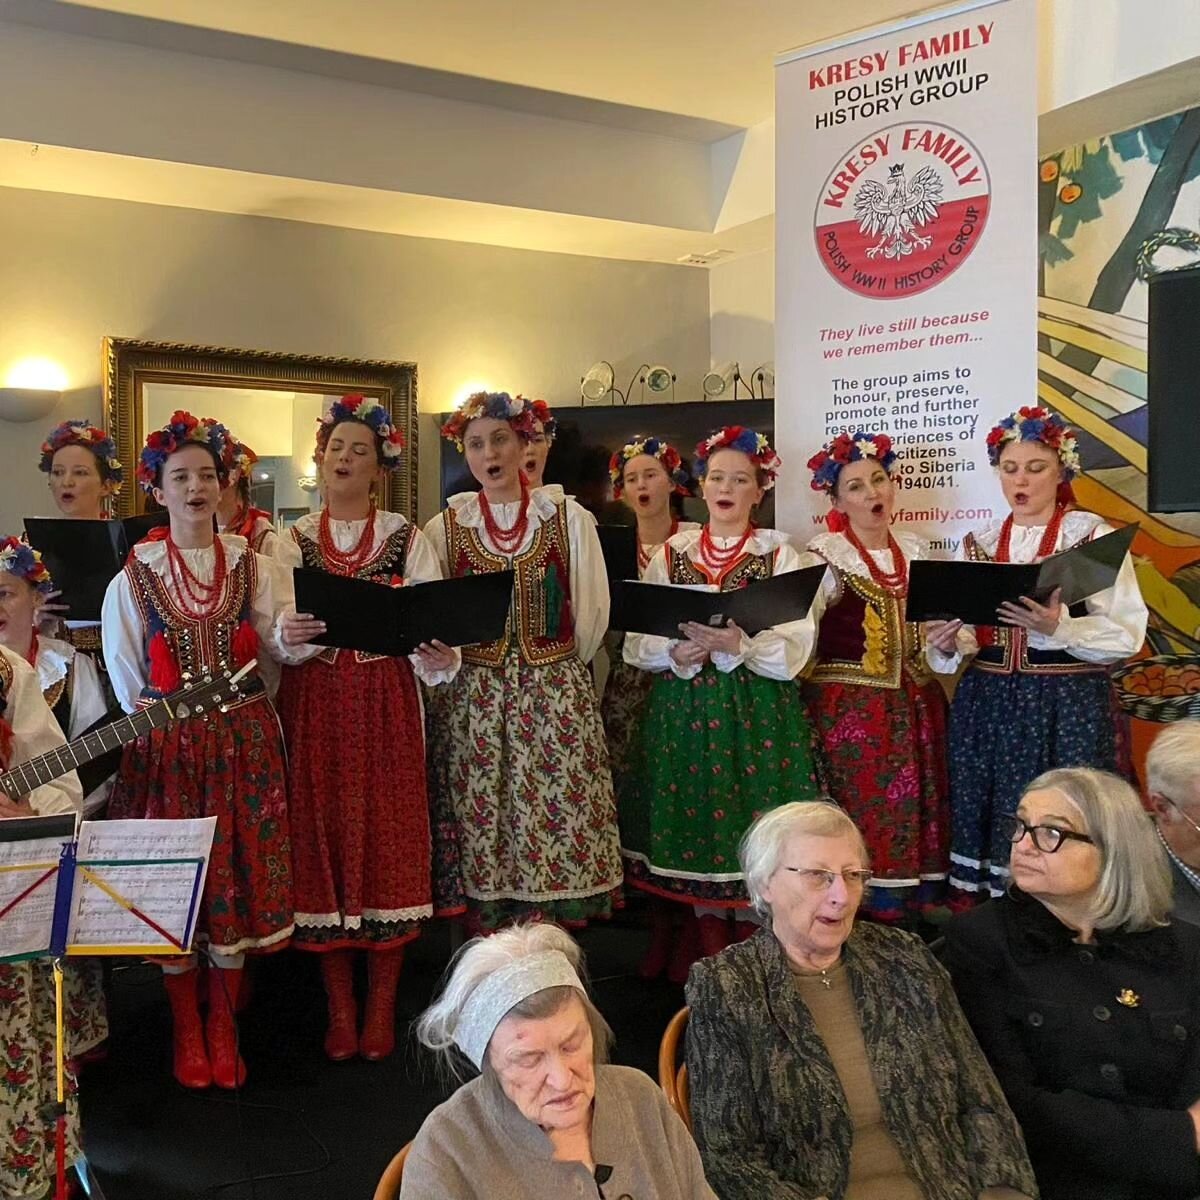 On 9th February, Fiołki performed a selection of folk and patriotic songs at an event marking the 84th anniversary of the first deportations of Poles to Siberia. Among those attending were some of the last remaining Siberian survivors and their famil